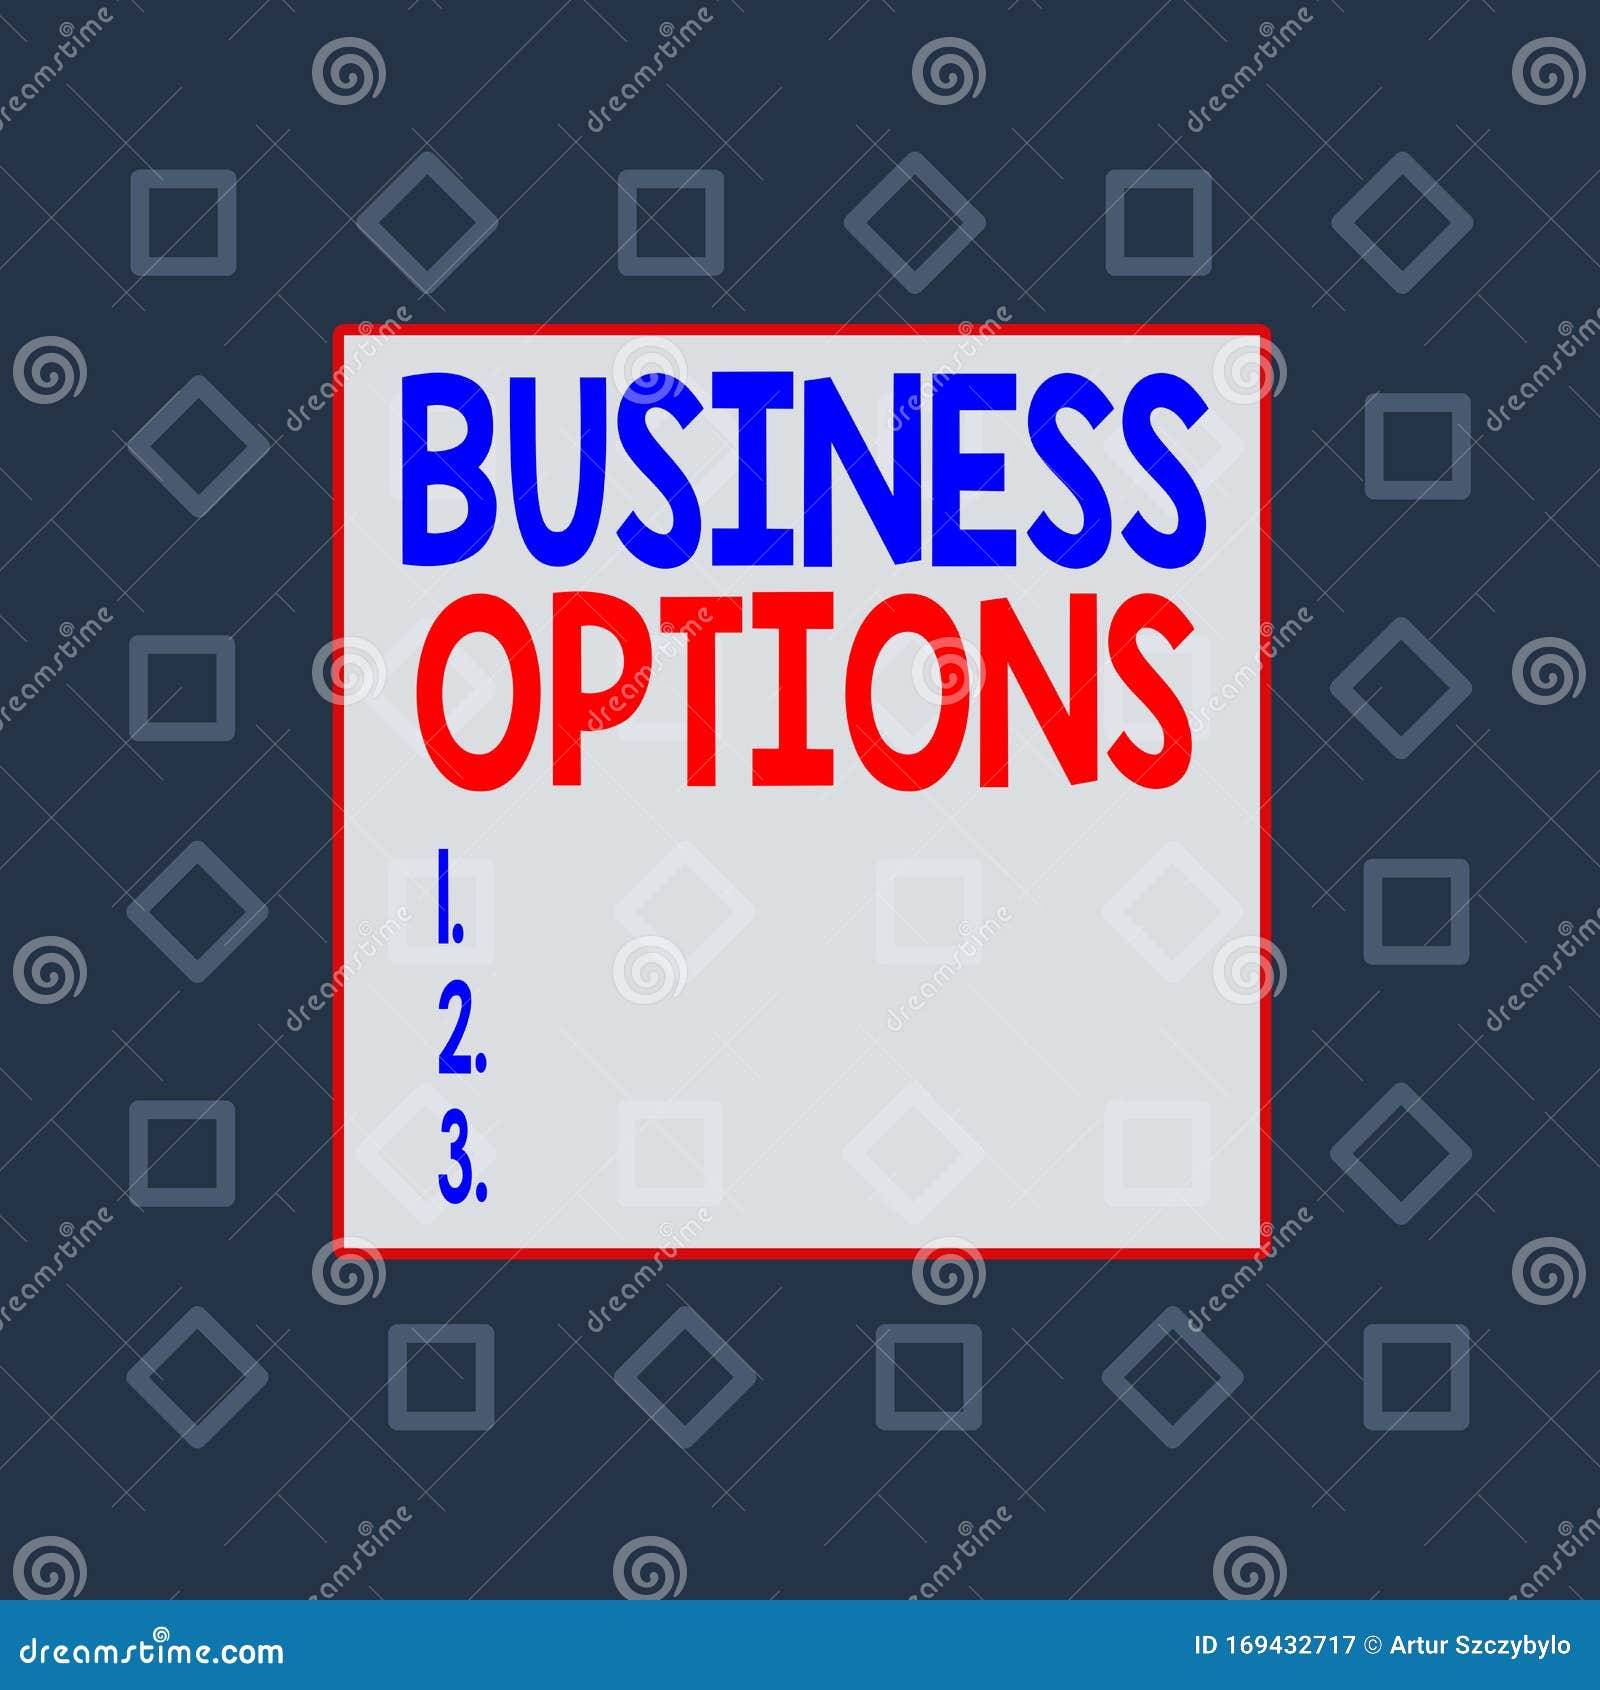 Business Options